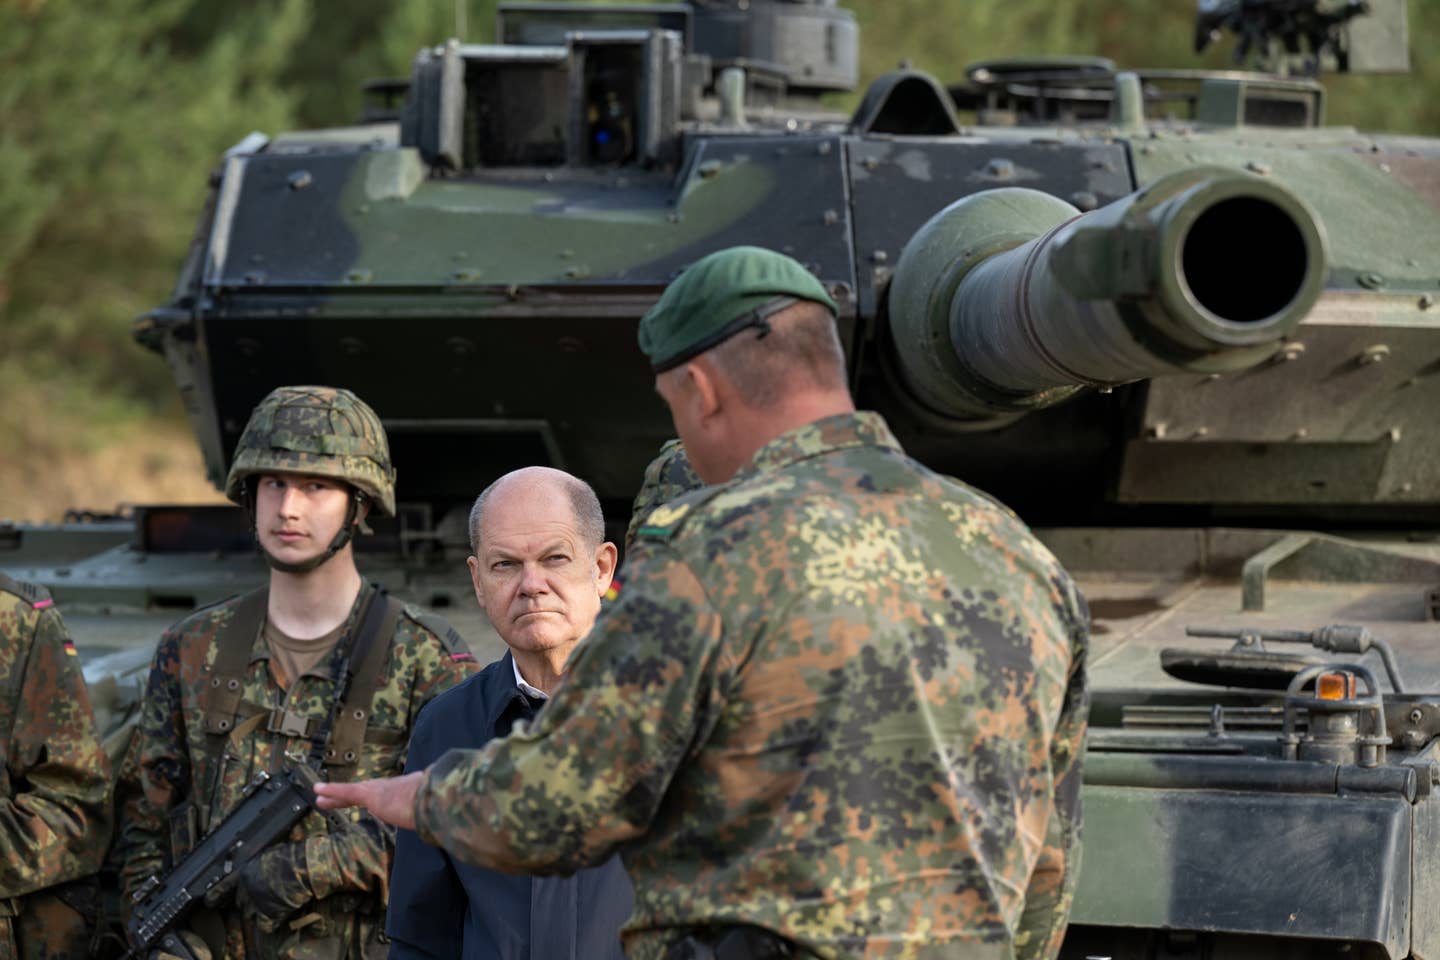 German Chancellor Olaf Scholz stands next to a Leopard 2 main battle tank while speaking with soldiers during a visit to the German Army training center in Ostenholz on October 17, 2022. <em>Photo by David Hecker/Getty Images</em>